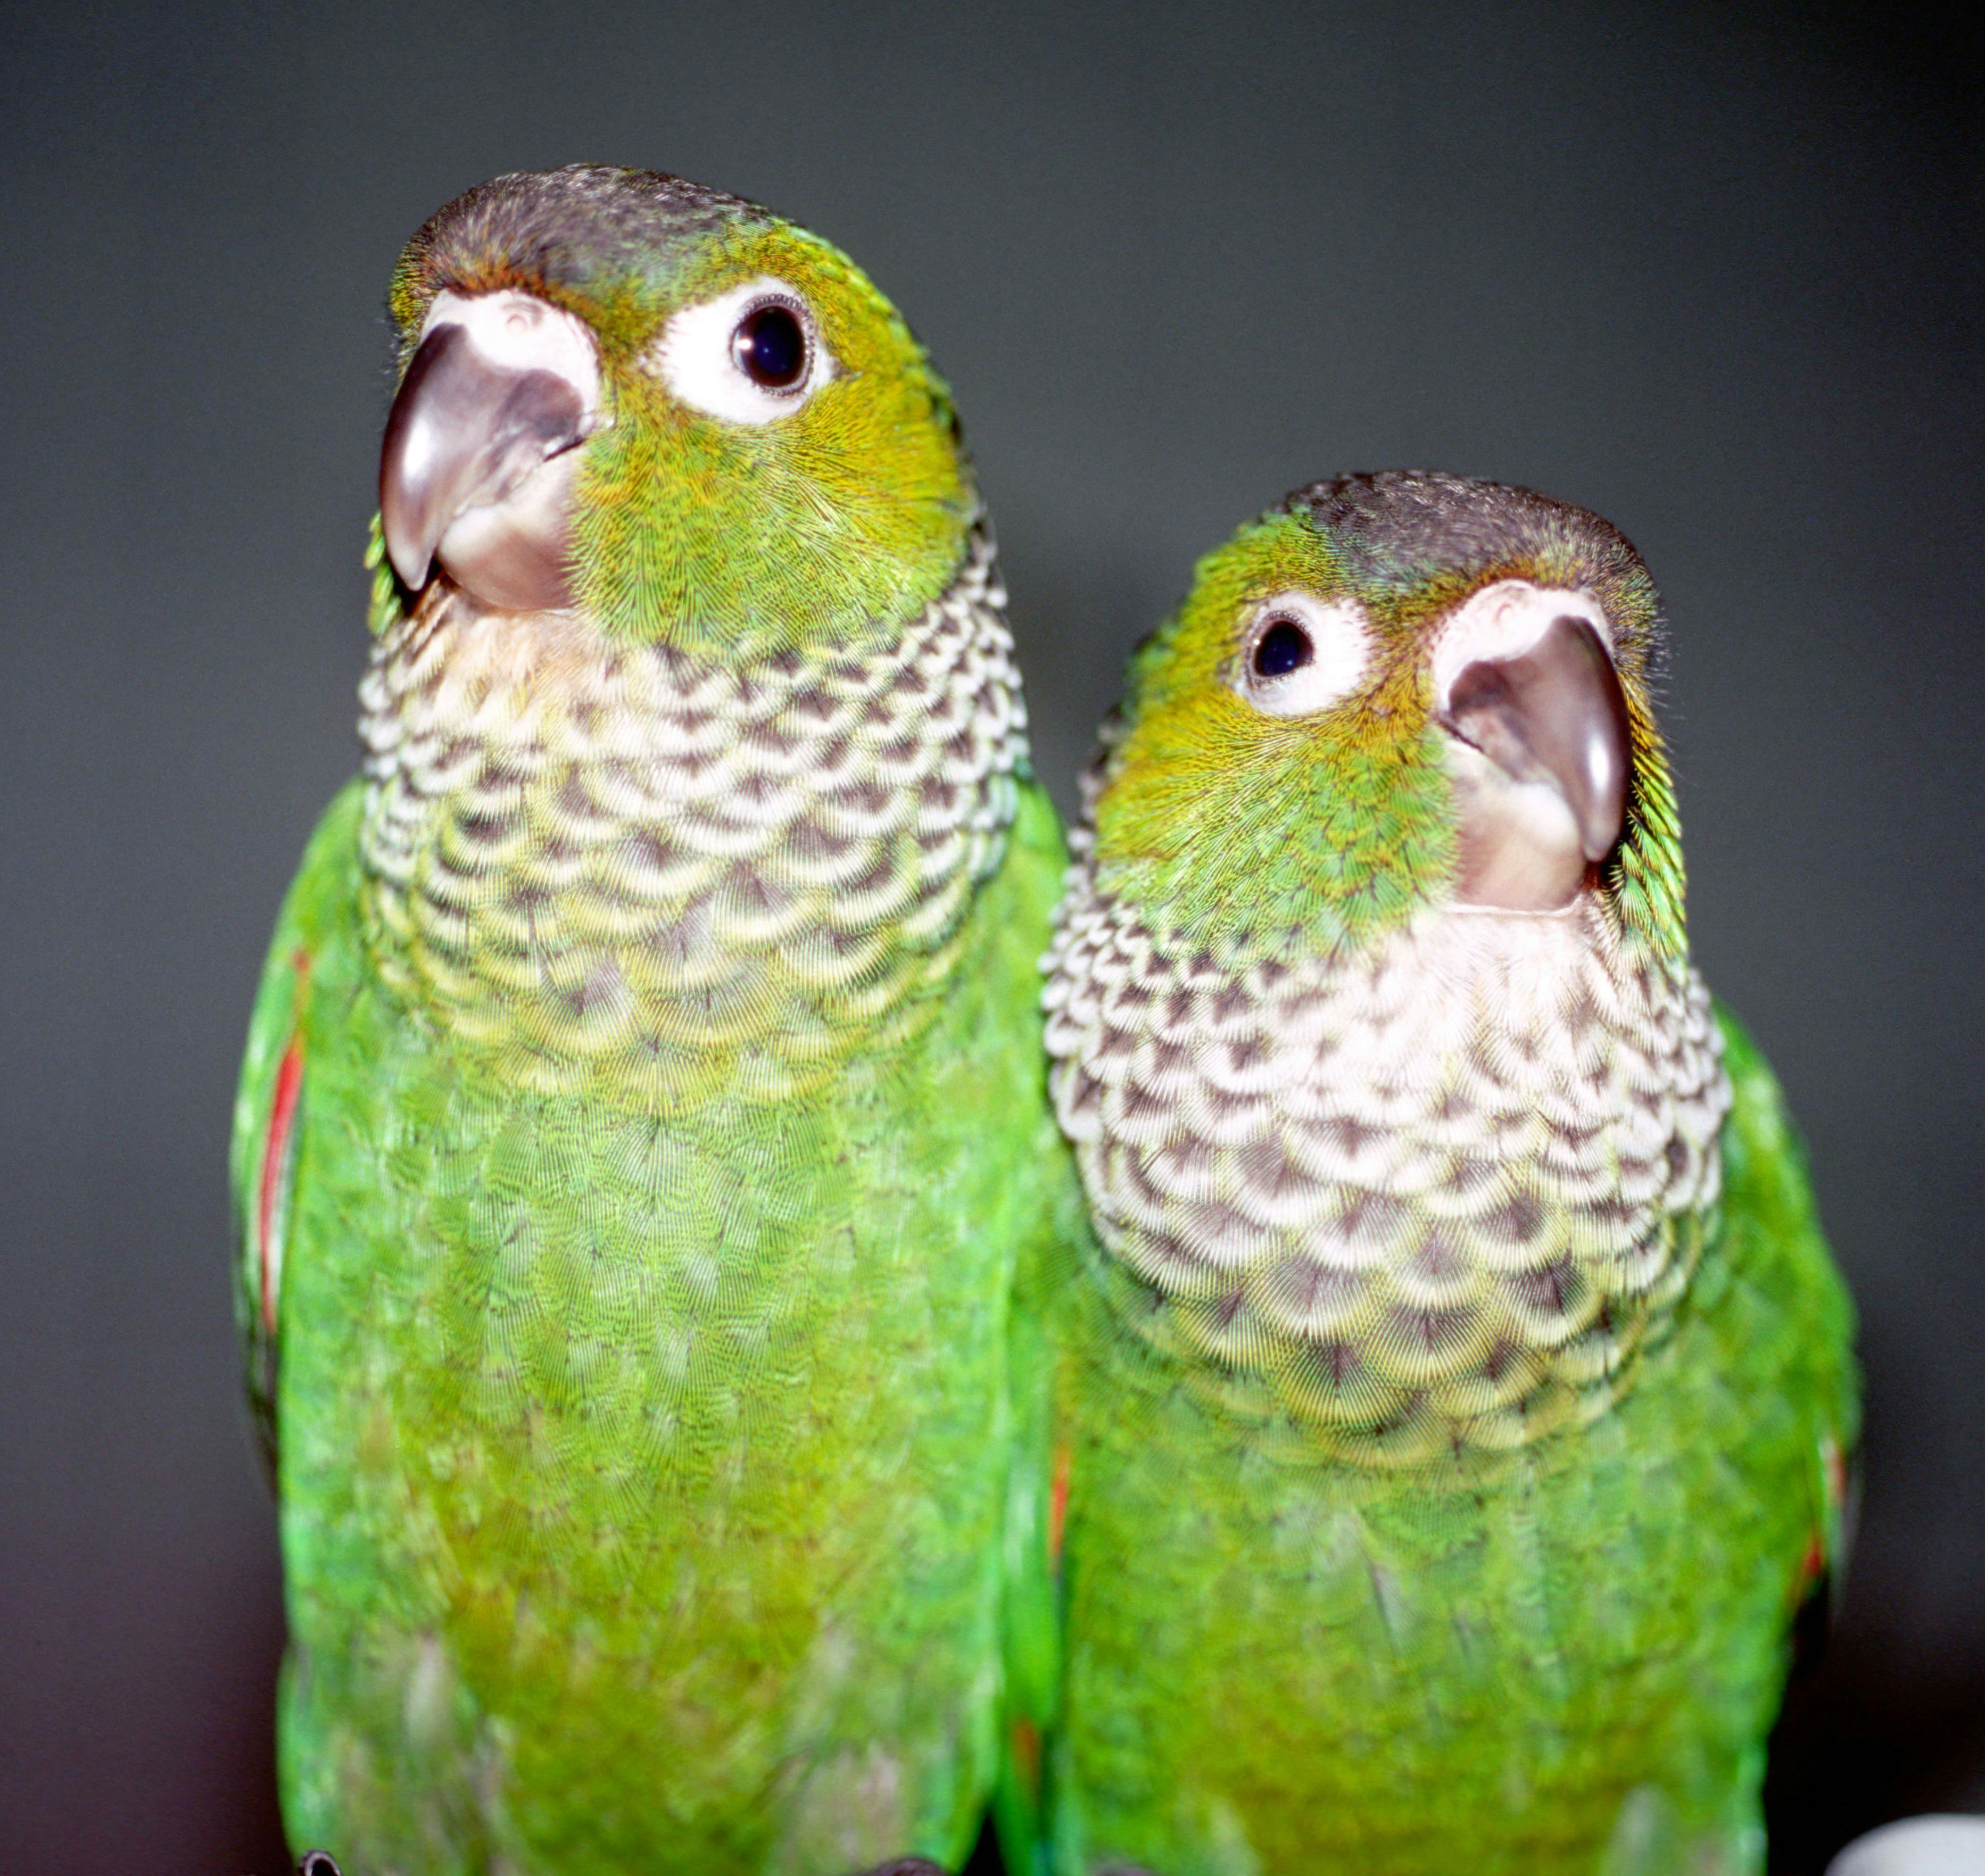 A pair of conures